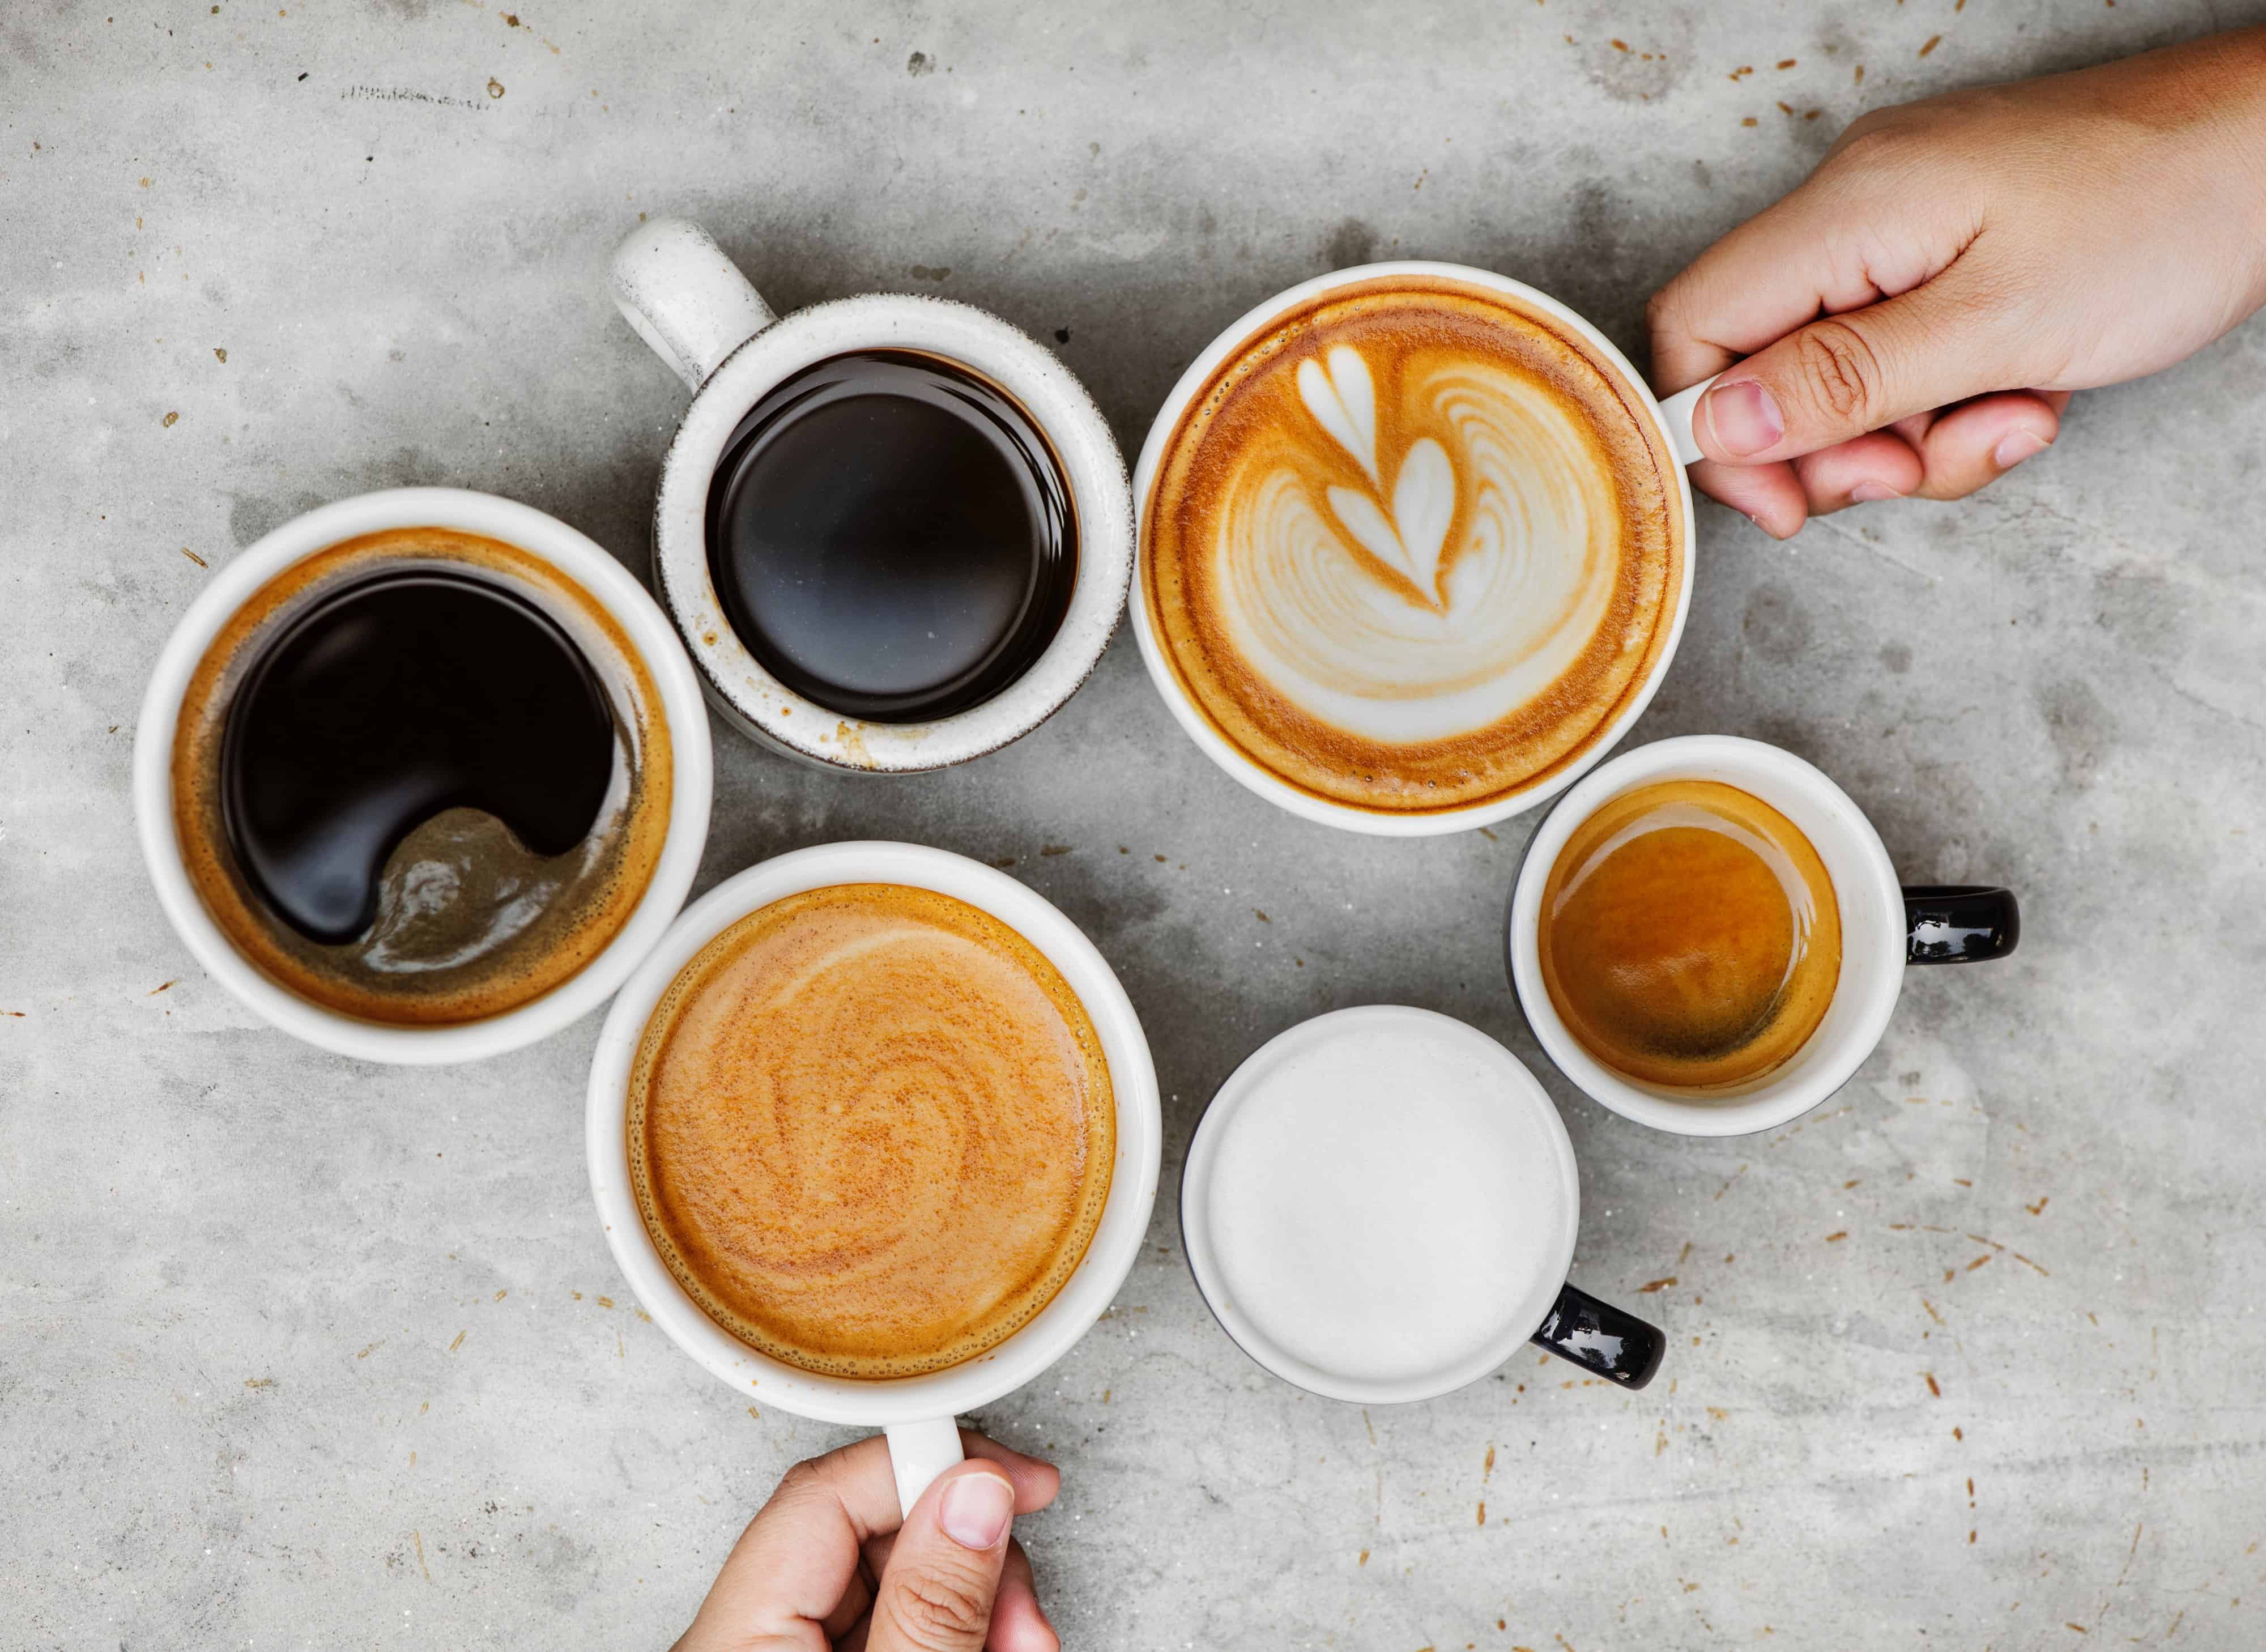  Is Coffee Healthy?